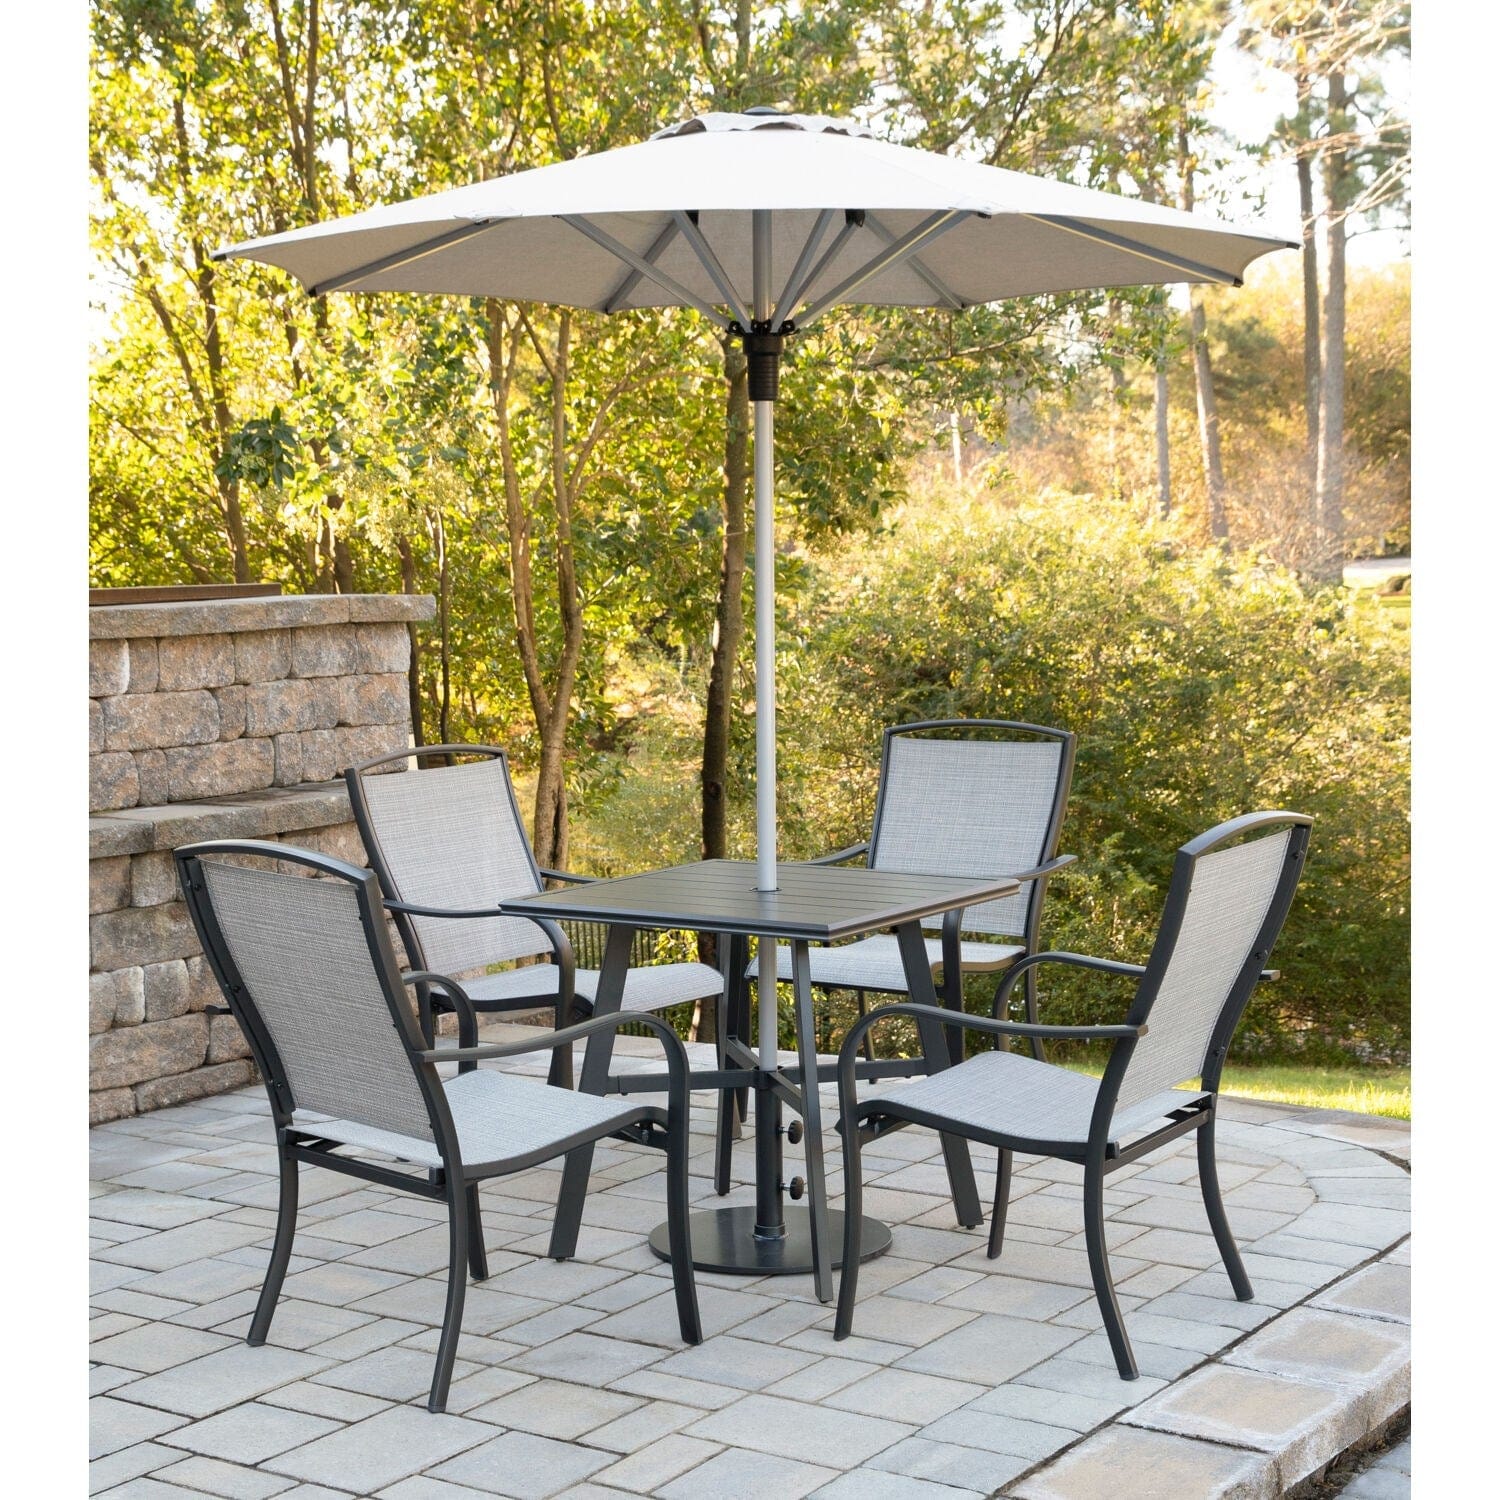 Hanover Outdoor Dining Set Hanover Foxhill 5-Piece Commercial-Grade Patio Dining Set with 4 Sling Dining Chairs, 38-in. Square Slat-Top Table, Umbrella and Base | FOXDN5PCS-G-SU